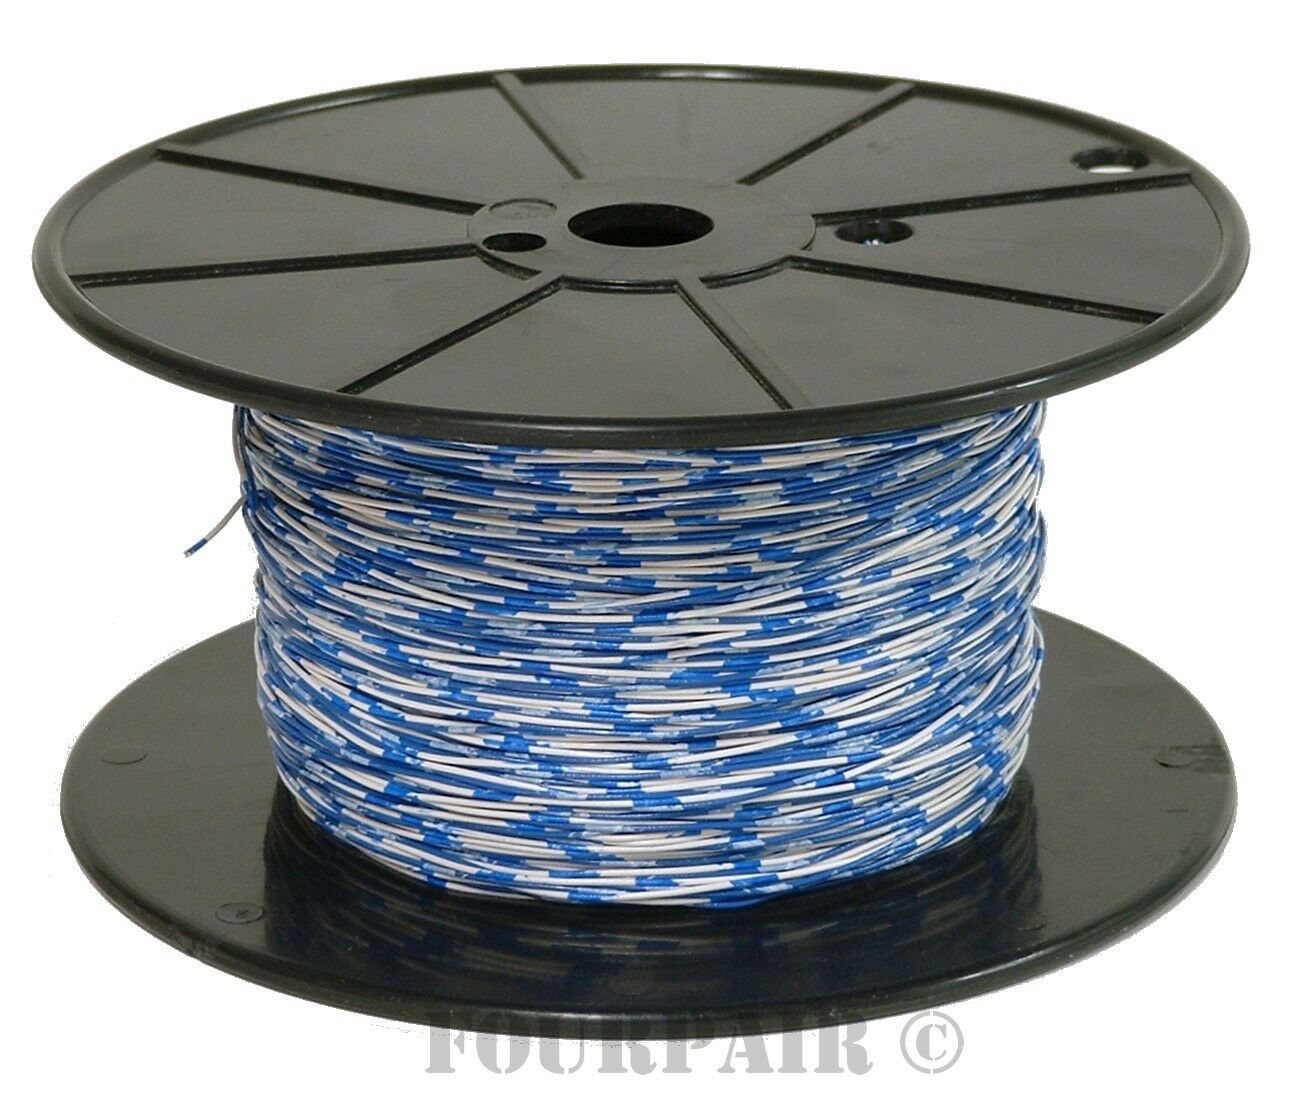 Cross Connect Telephone Wire Cable - 24/2 2c 24 Awg 1 Pair Blue/white - 1000 Ft